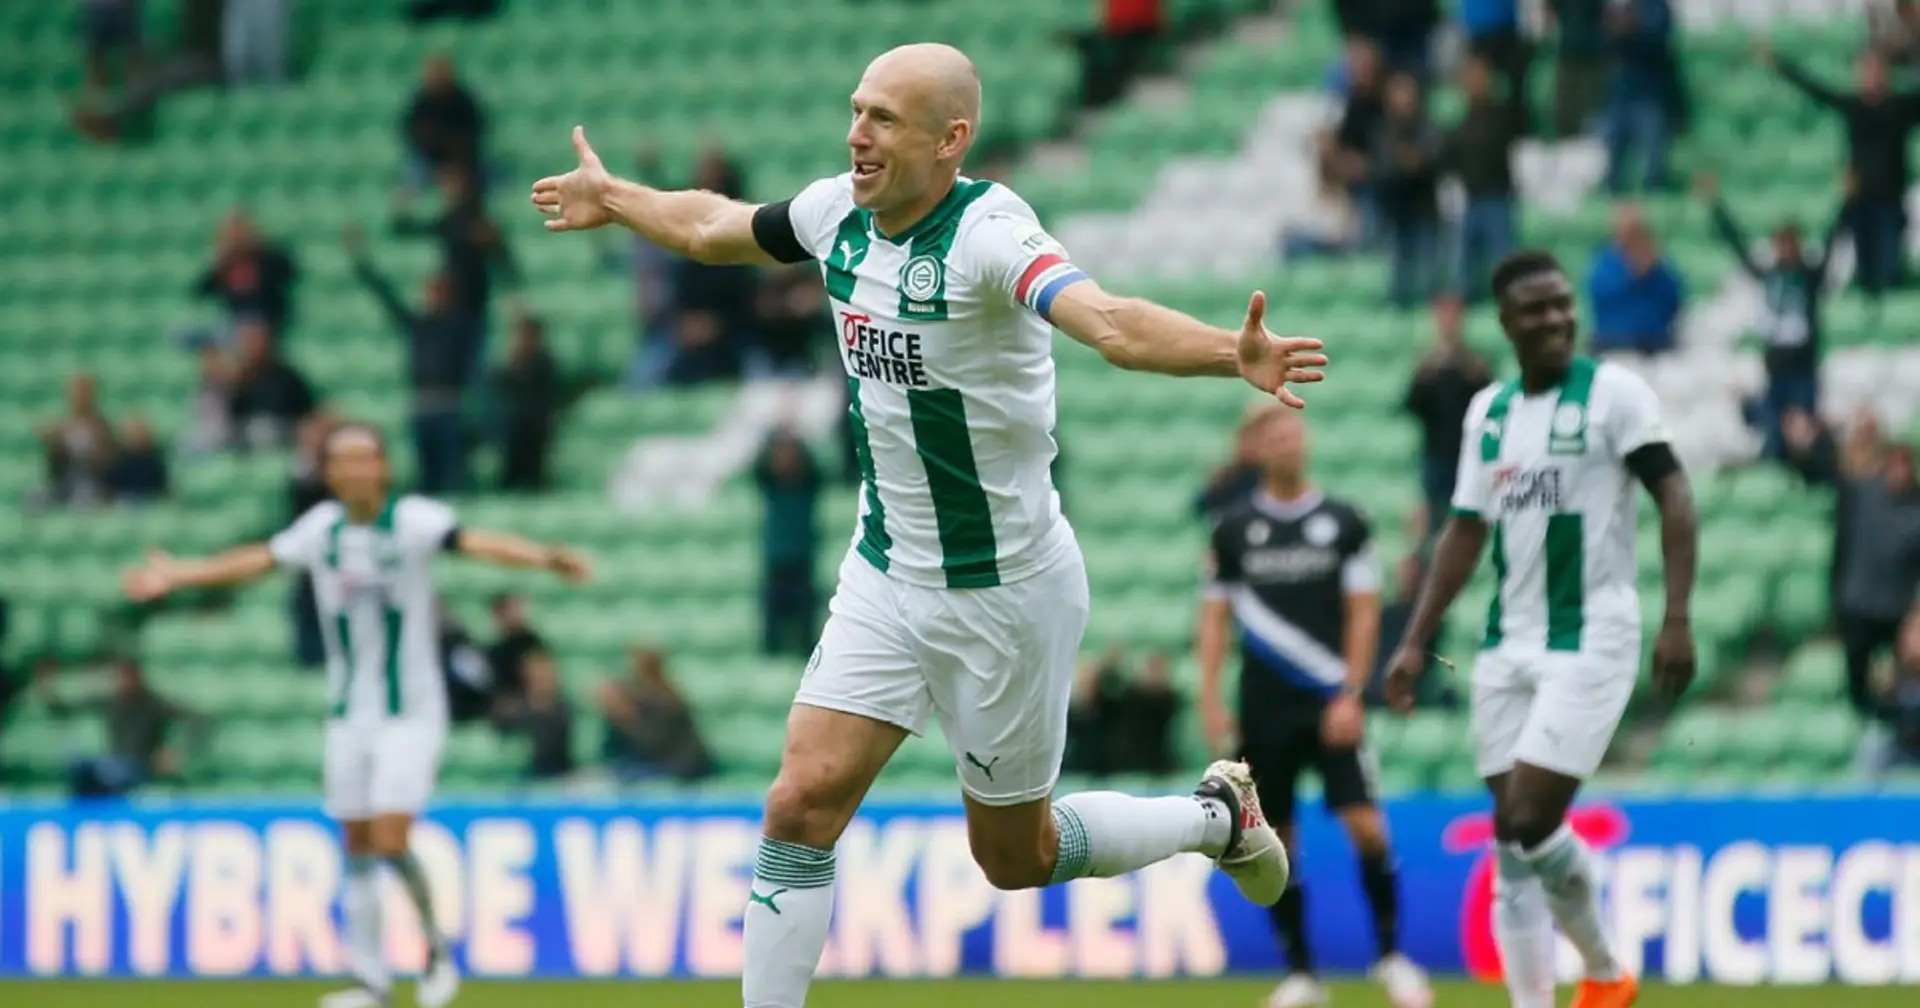 Robben rolls back years by scoring his first goal for Groningen after coming out of retirement